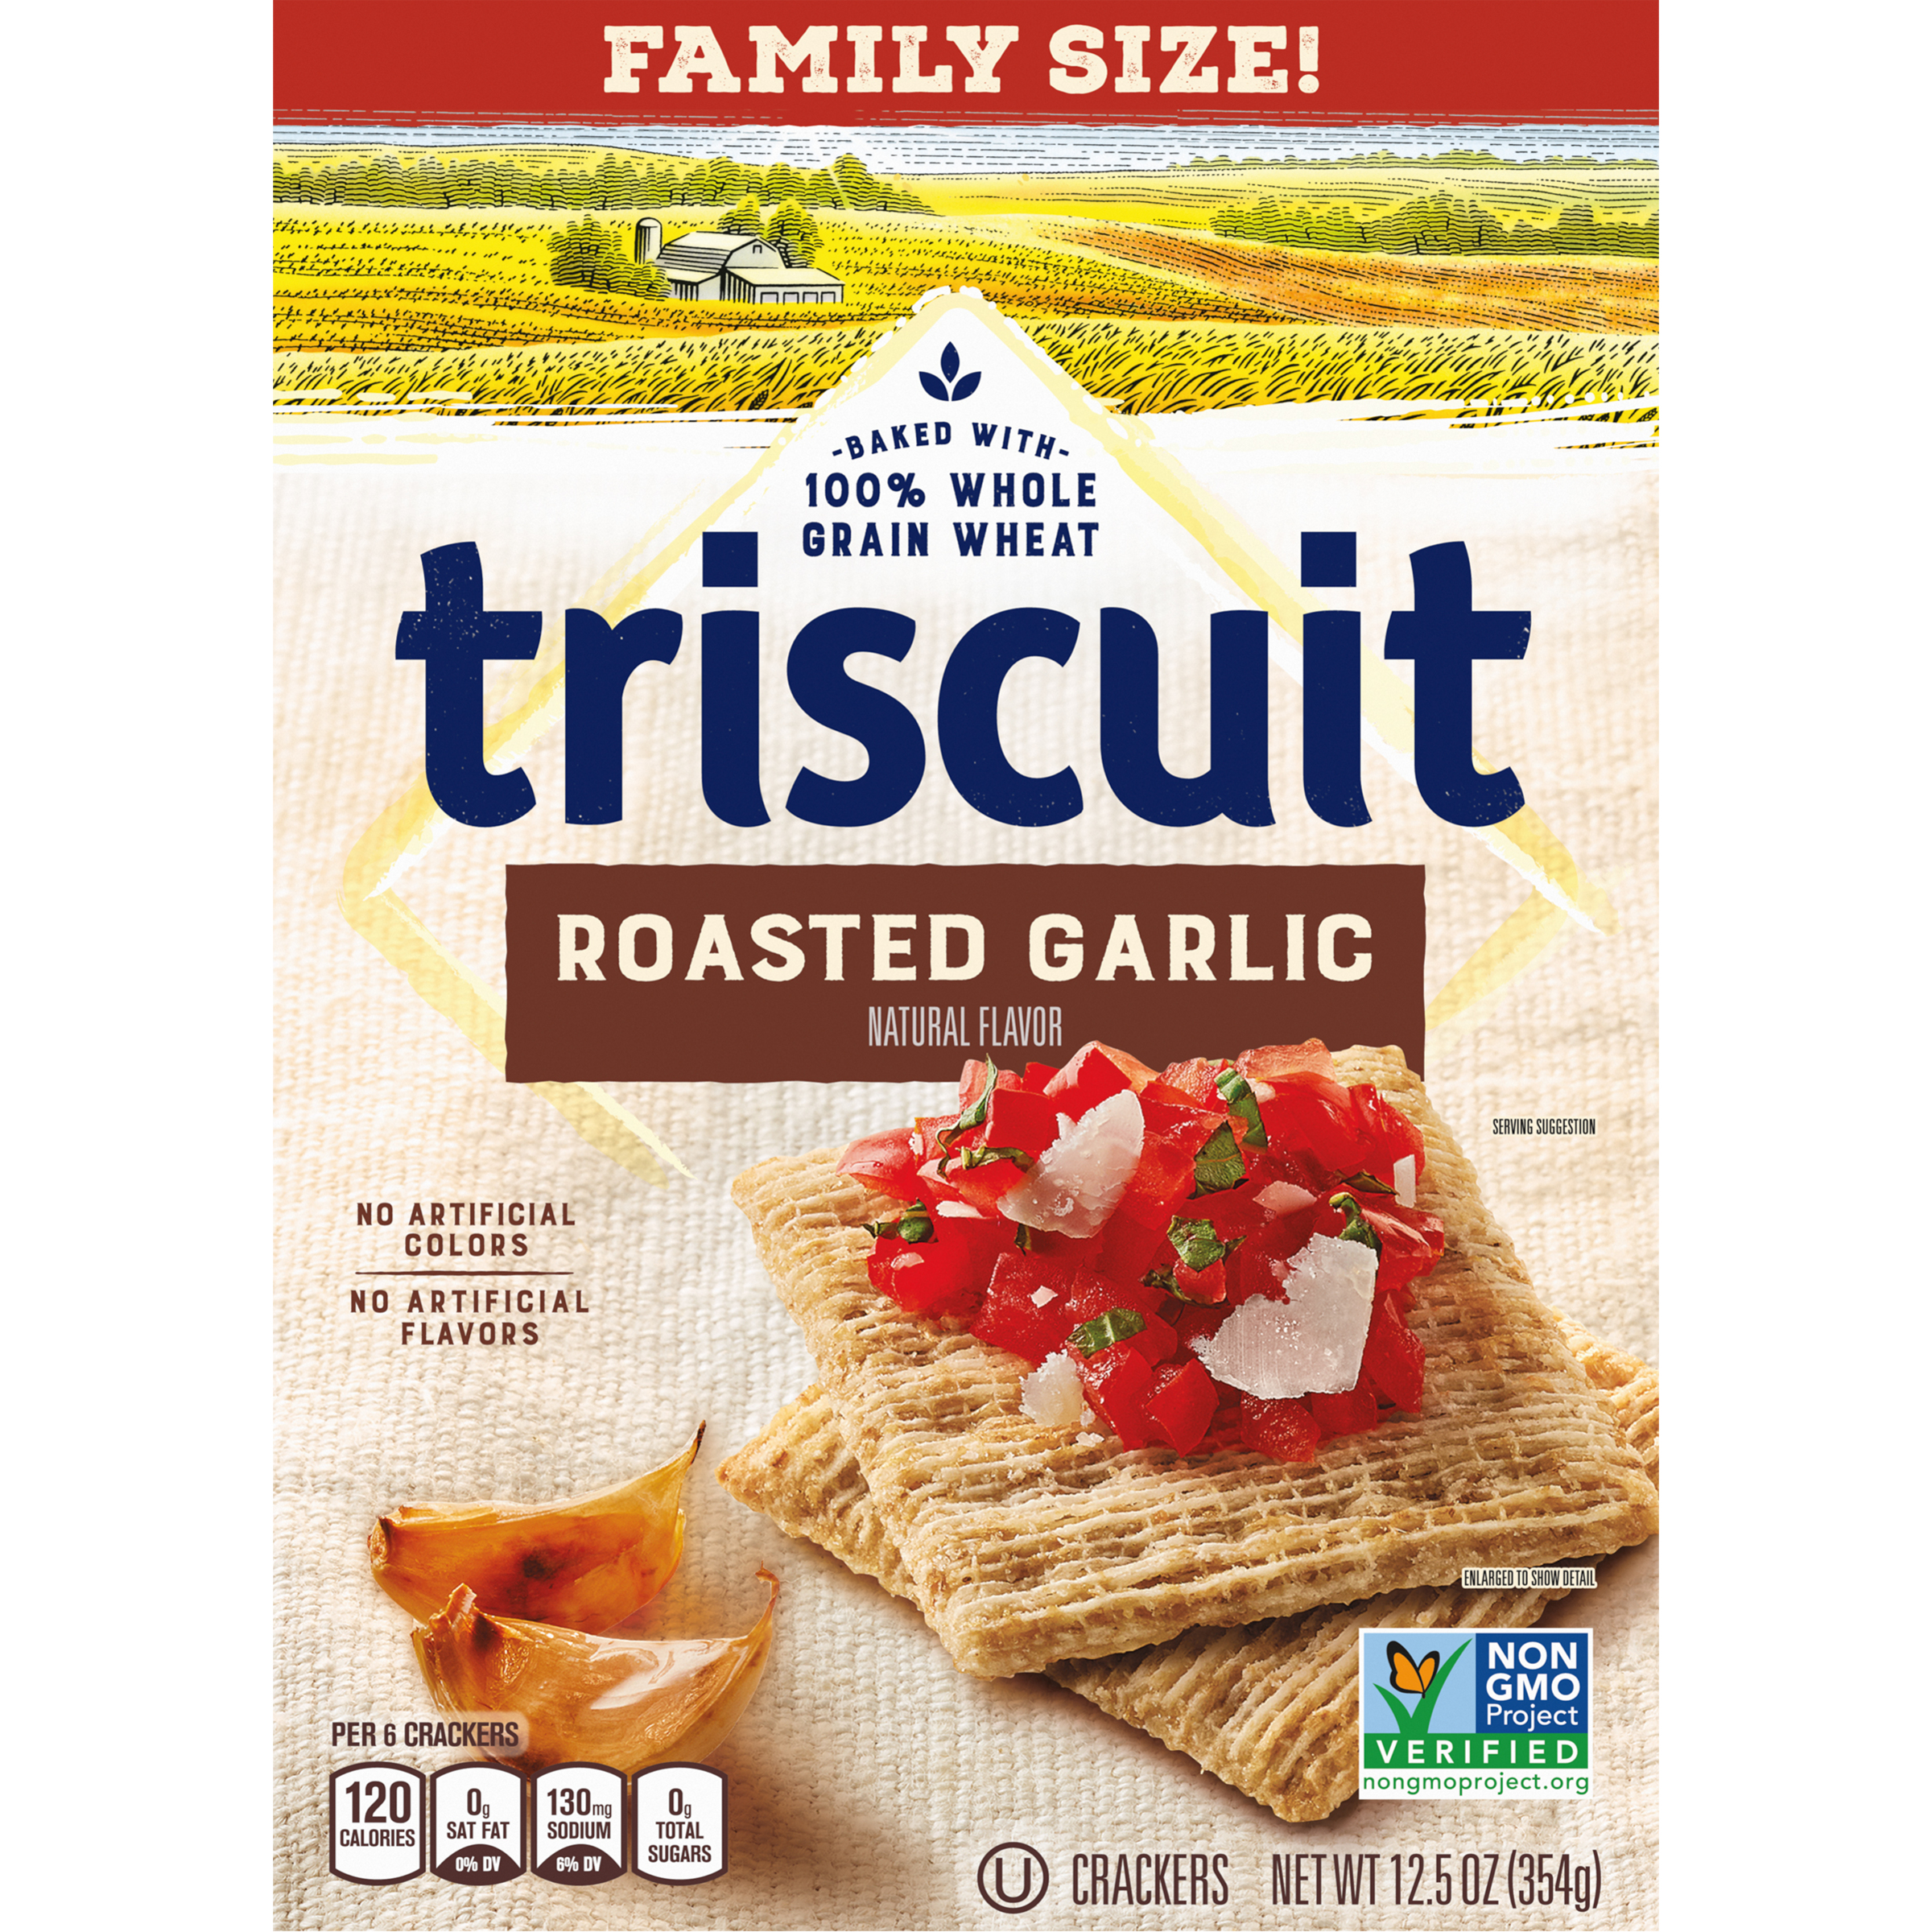 Triscuit Roasted Garlic Whole Grain Wheat Crackers, Family Size, 12.5 oz-2